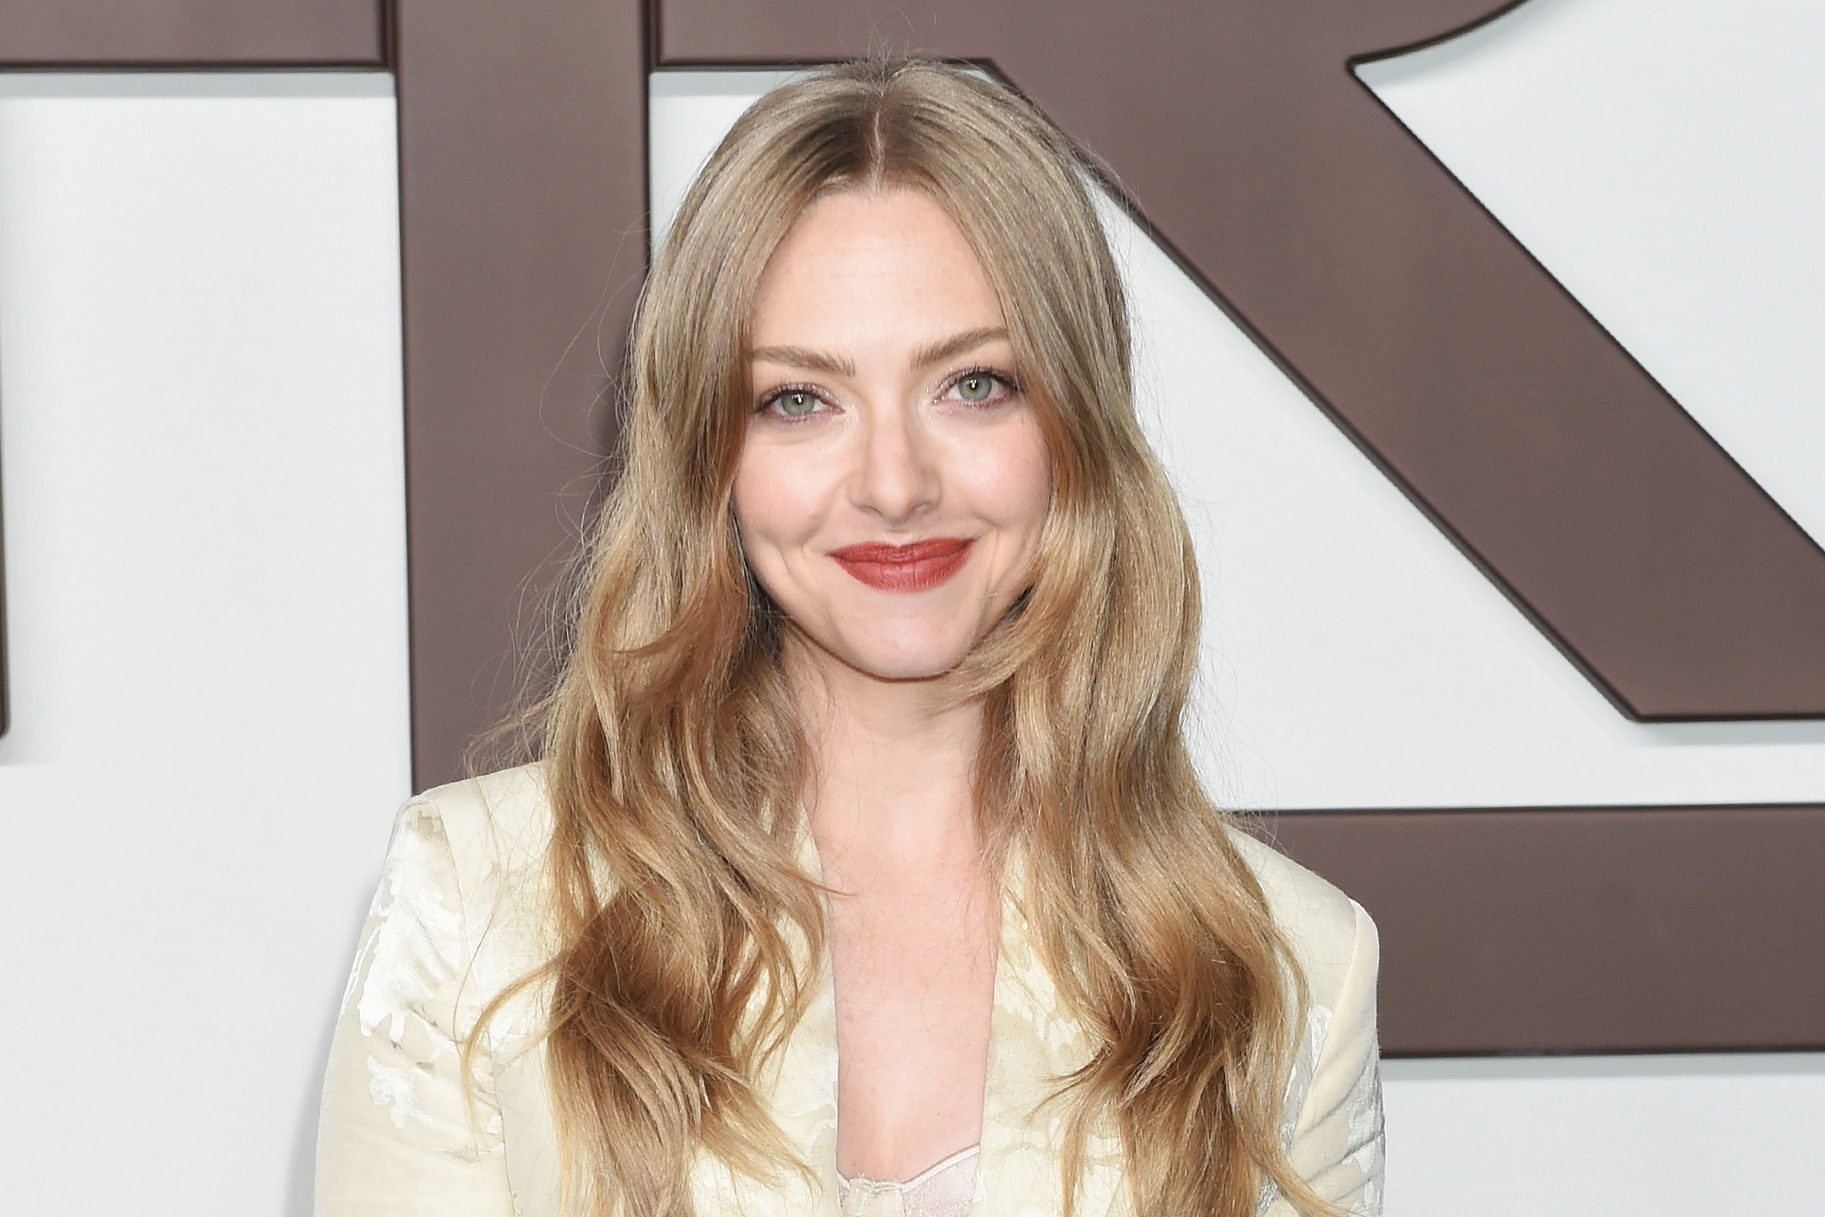 Amanda Seyfried attends the ralph lauren fashion show smiling in red lipstick